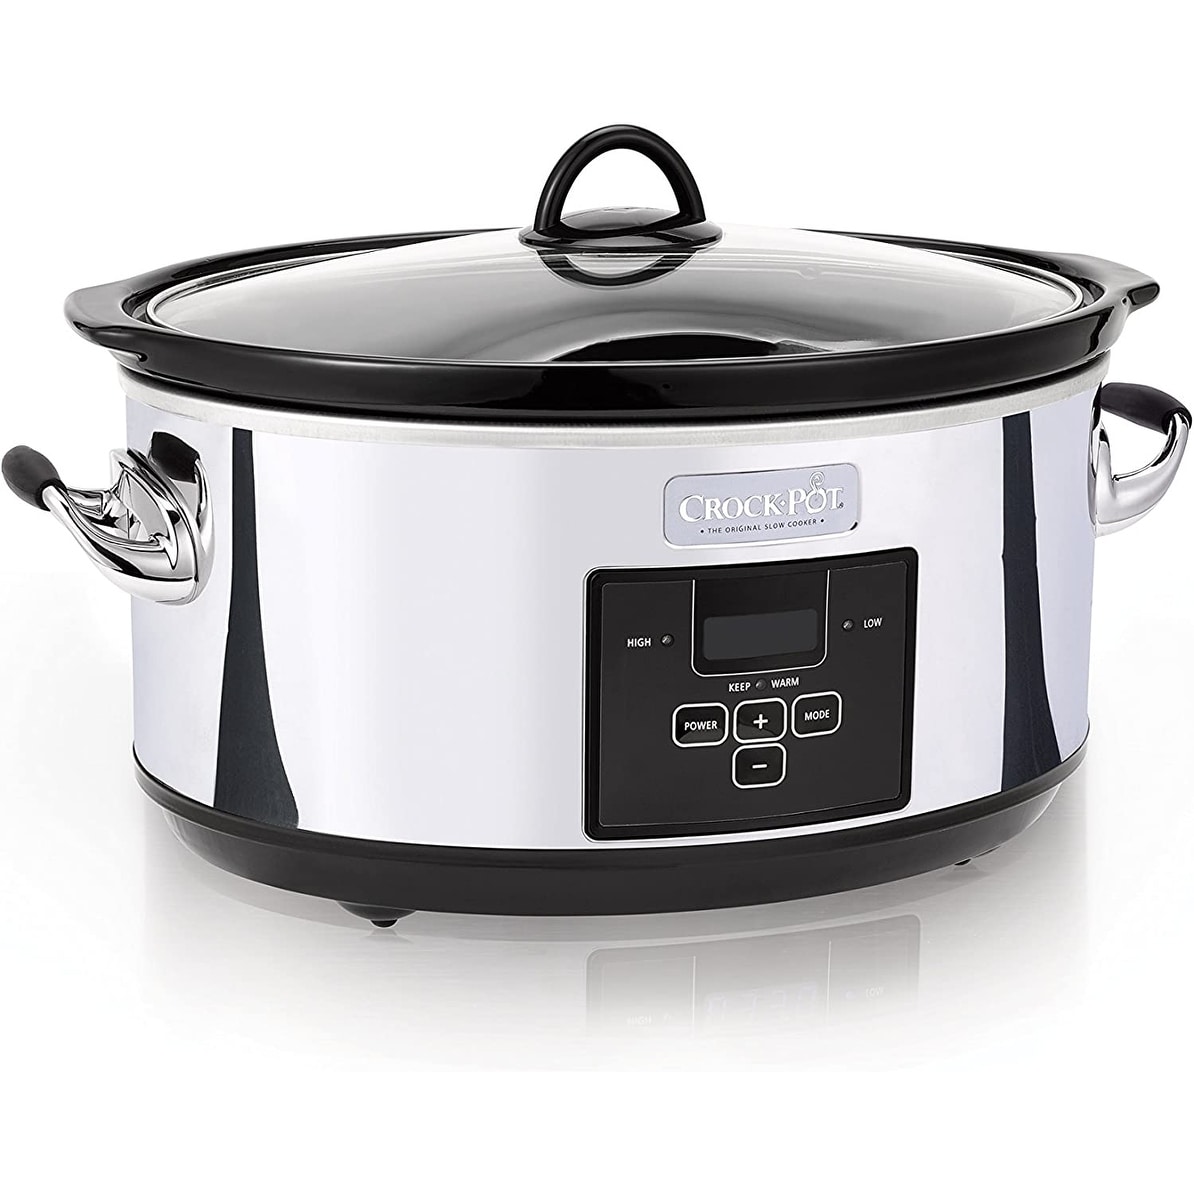 https://ak1.ostkcdn.com/images/products/is/images/direct/9373eaf188c8fd0ba465234078c70bc3dfd9f3c5/7-Quart-Slow-Cooker-with-Programmable-Controls-and-Digital-Timer%2C-Polished-Platinum.jpg